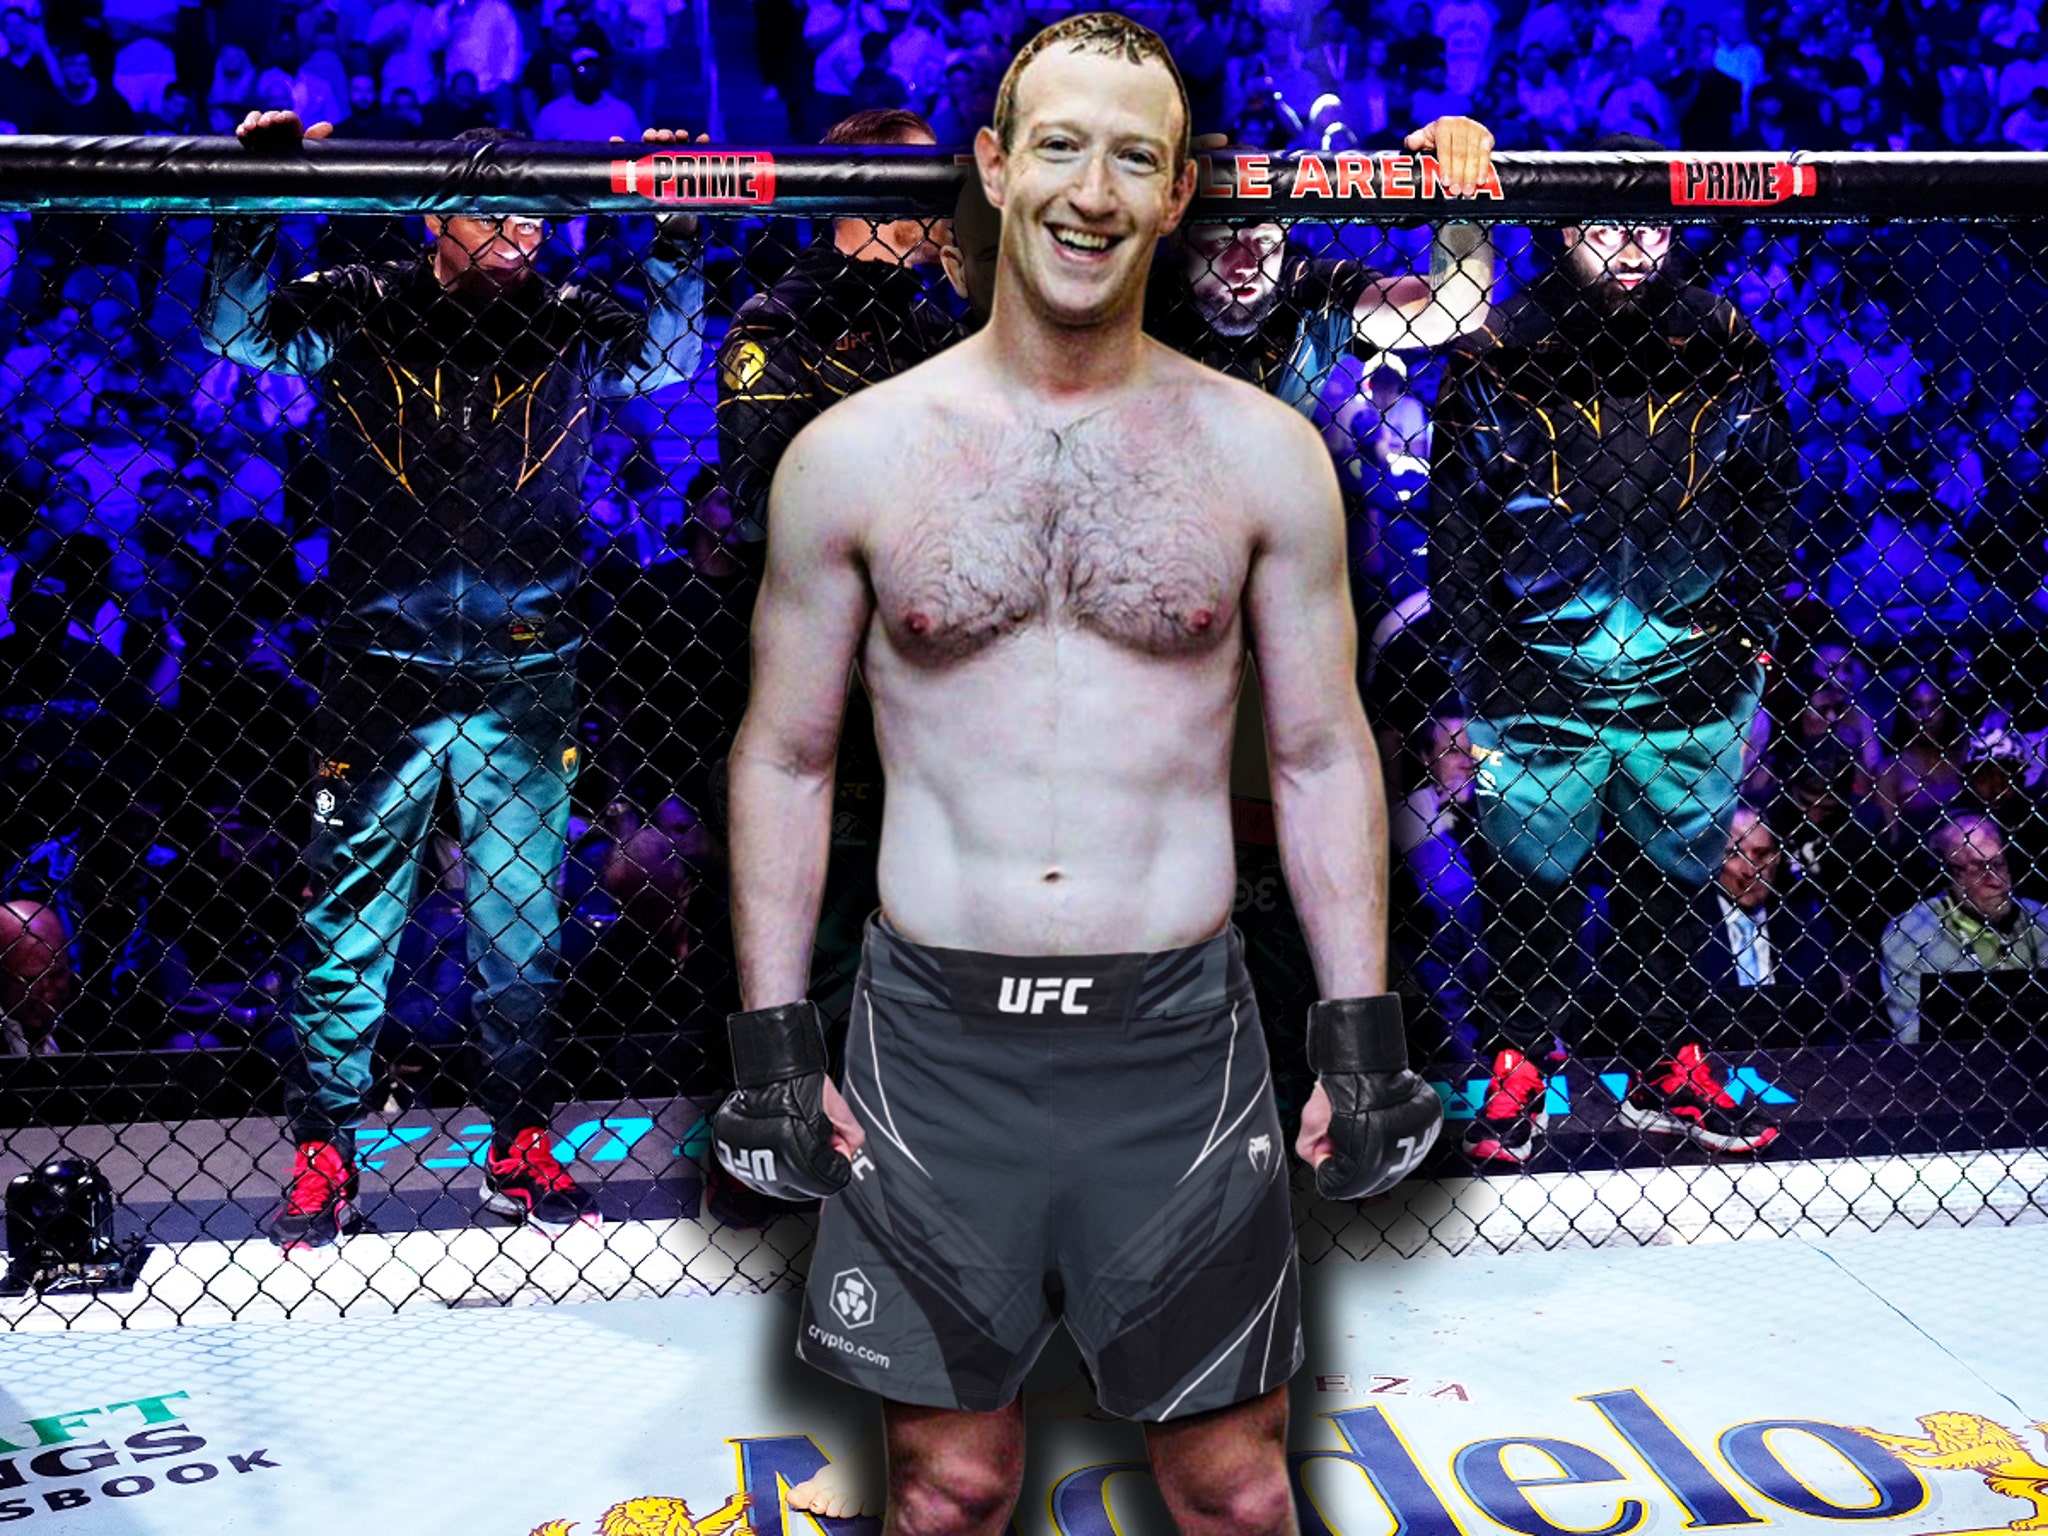 Mark Zuckerberg Indicates He Now Wants MMA Match with UFC Fighter photo